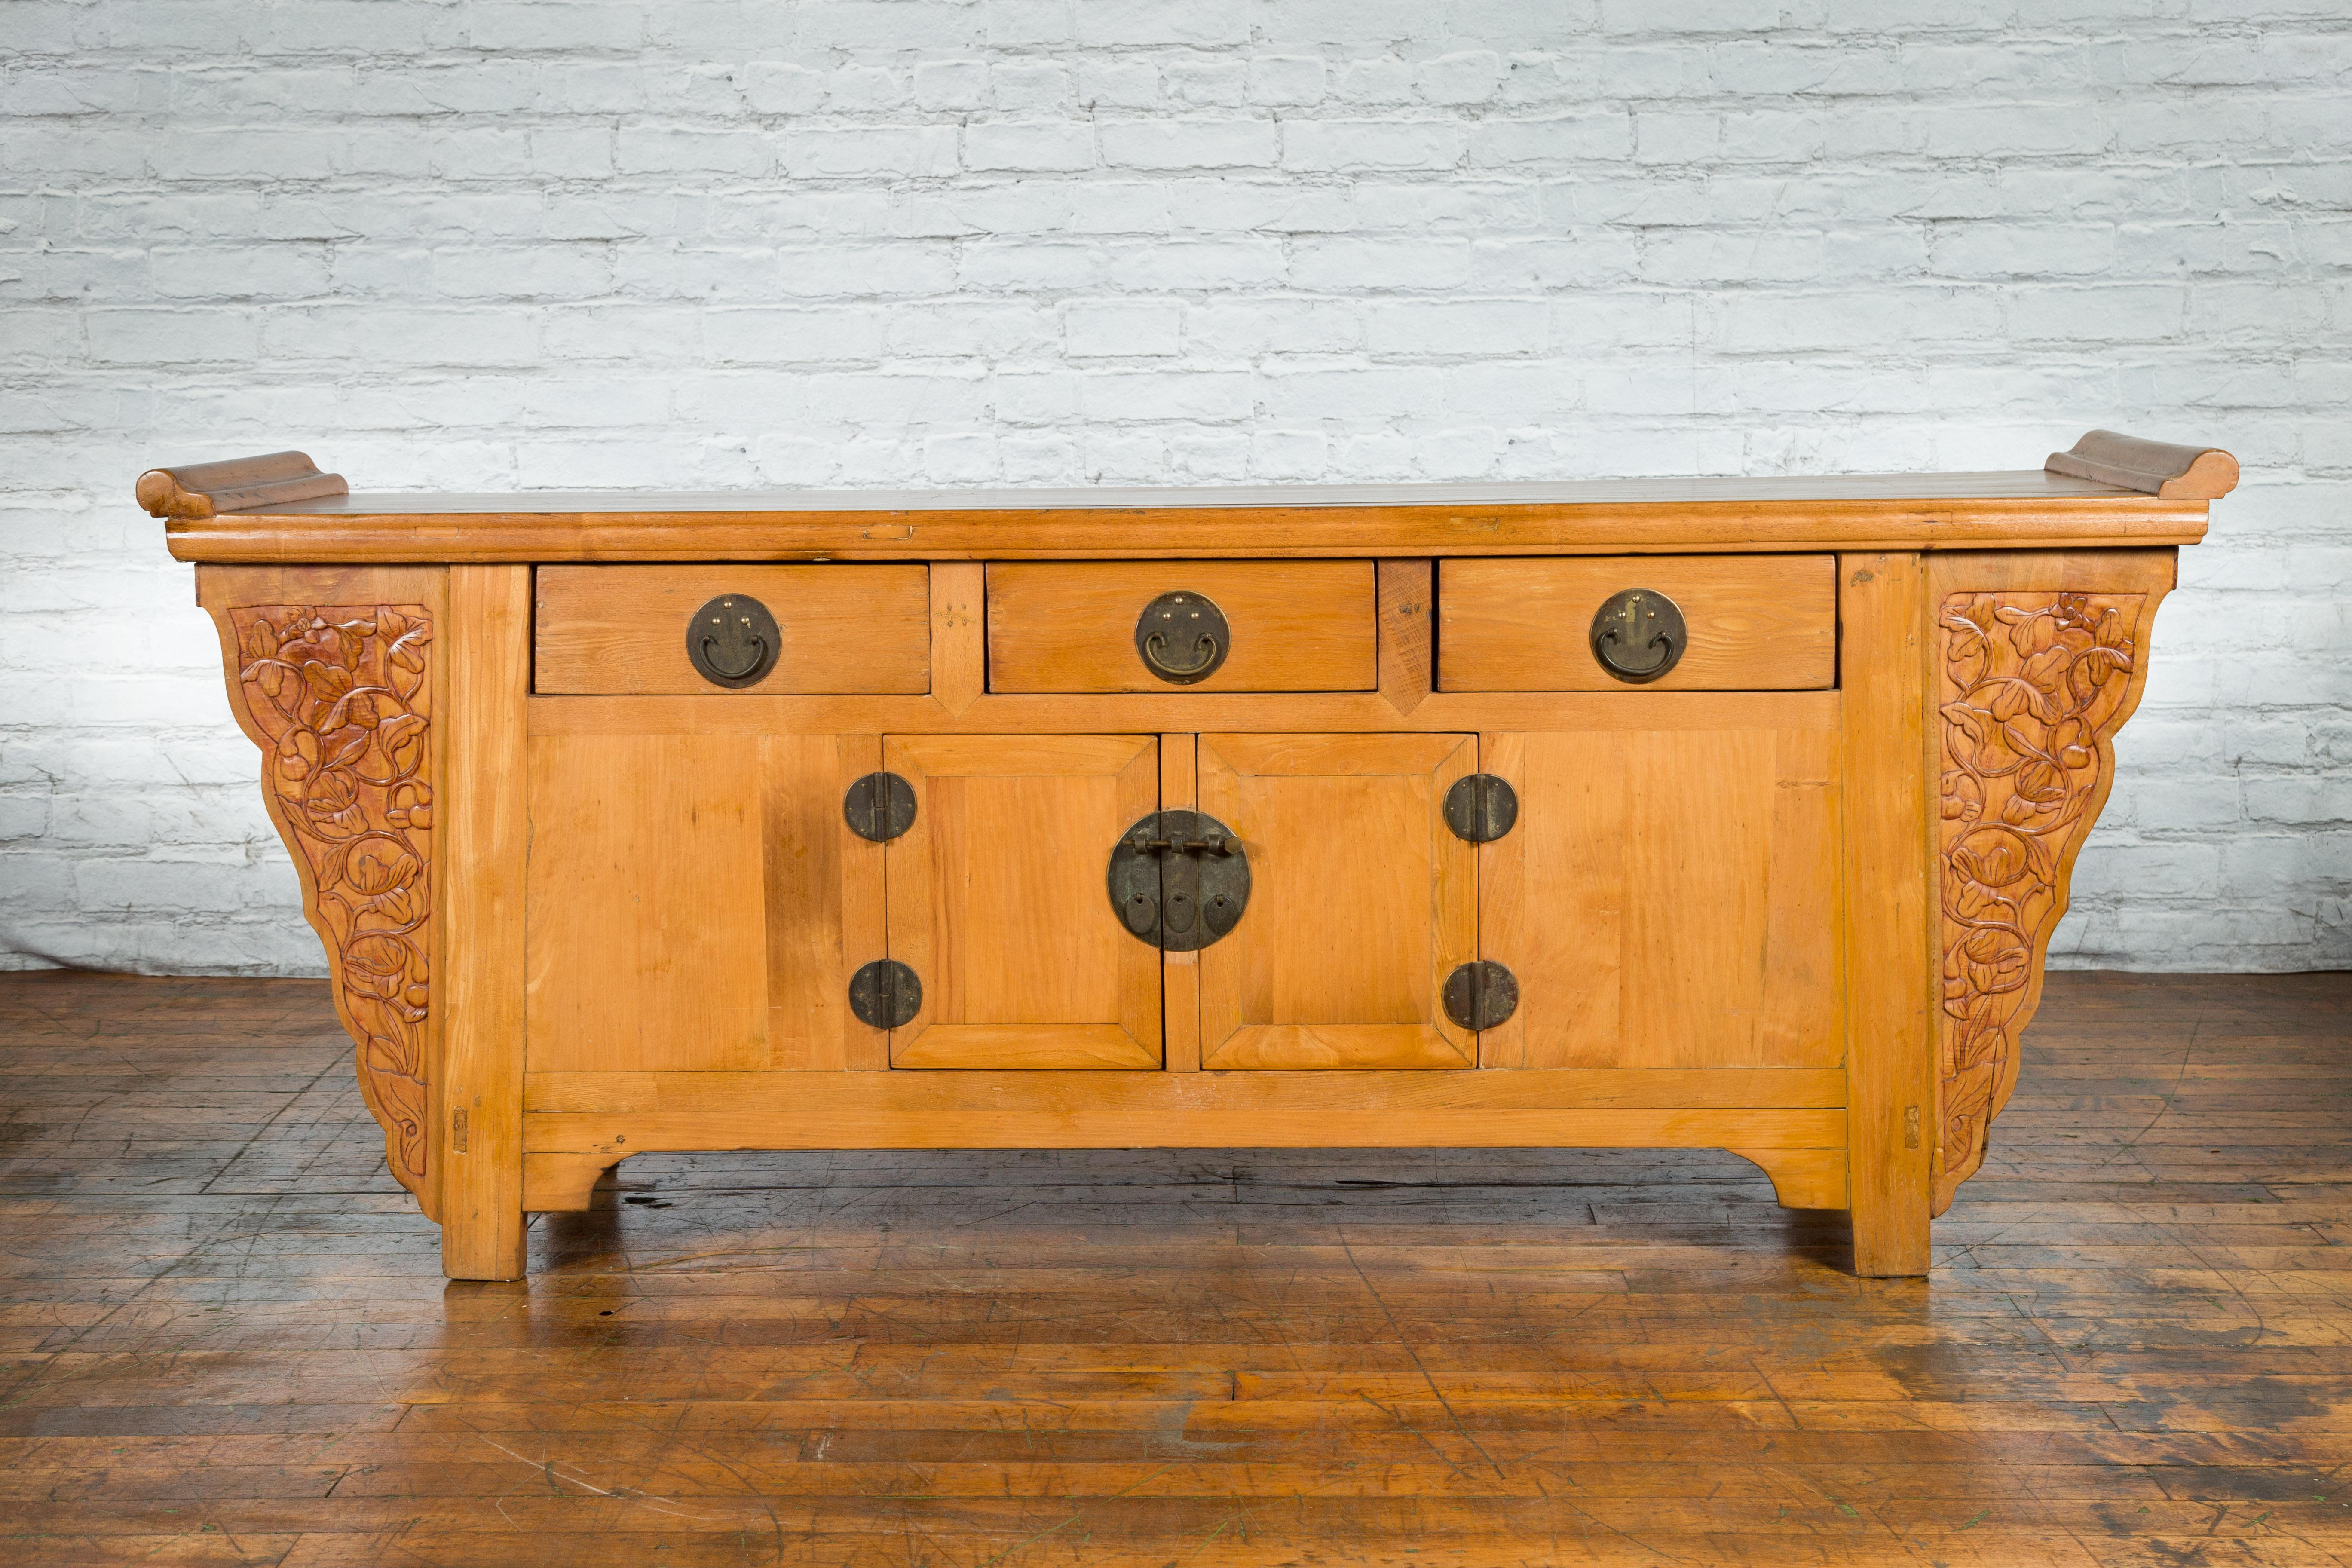 A Chinese Qing Dynasty period sideboard from the 19th century, with natural finish, carved spandrels and everted flanges. Created in China during the Qing Dynasty, this large sideboard features a rectangular planked top flanked with everted flanges,